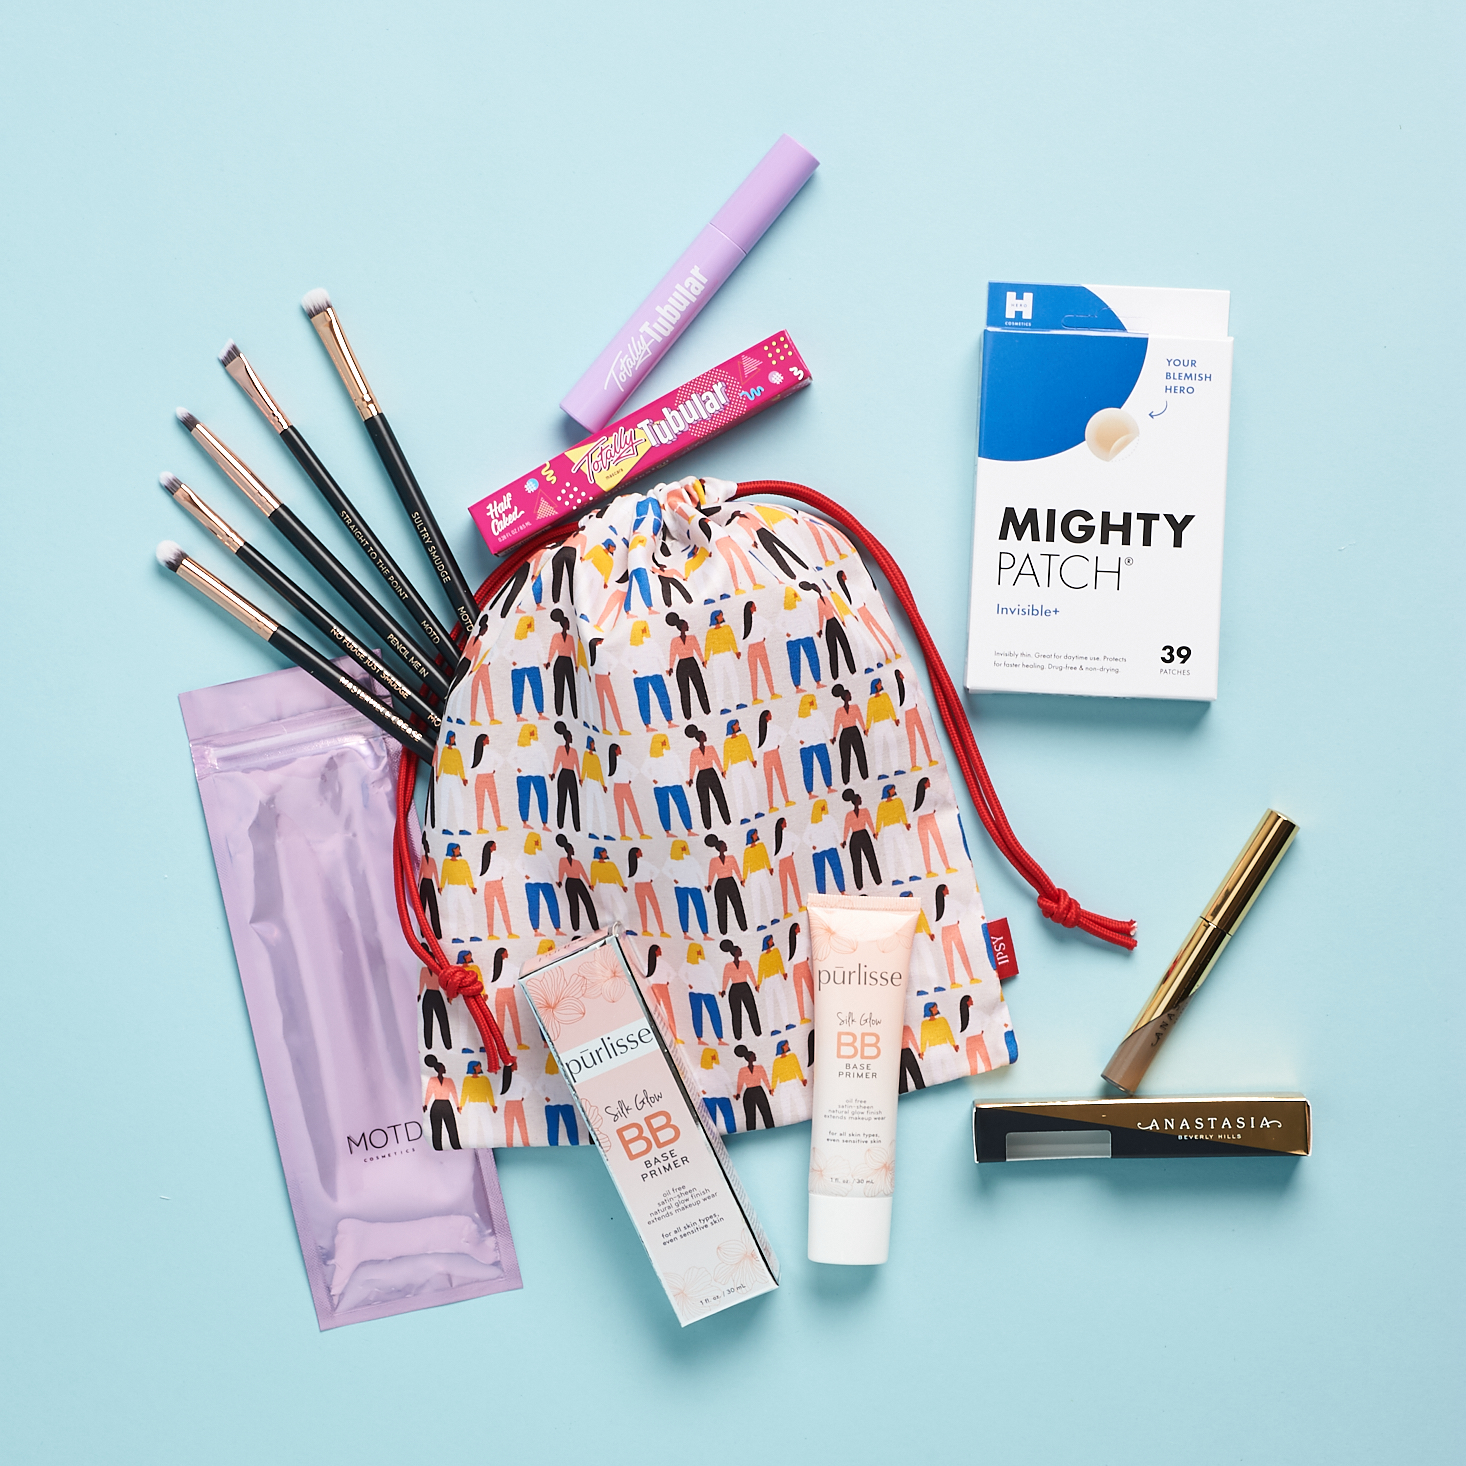 IPSY Glam Bag Plus Review – March 2021